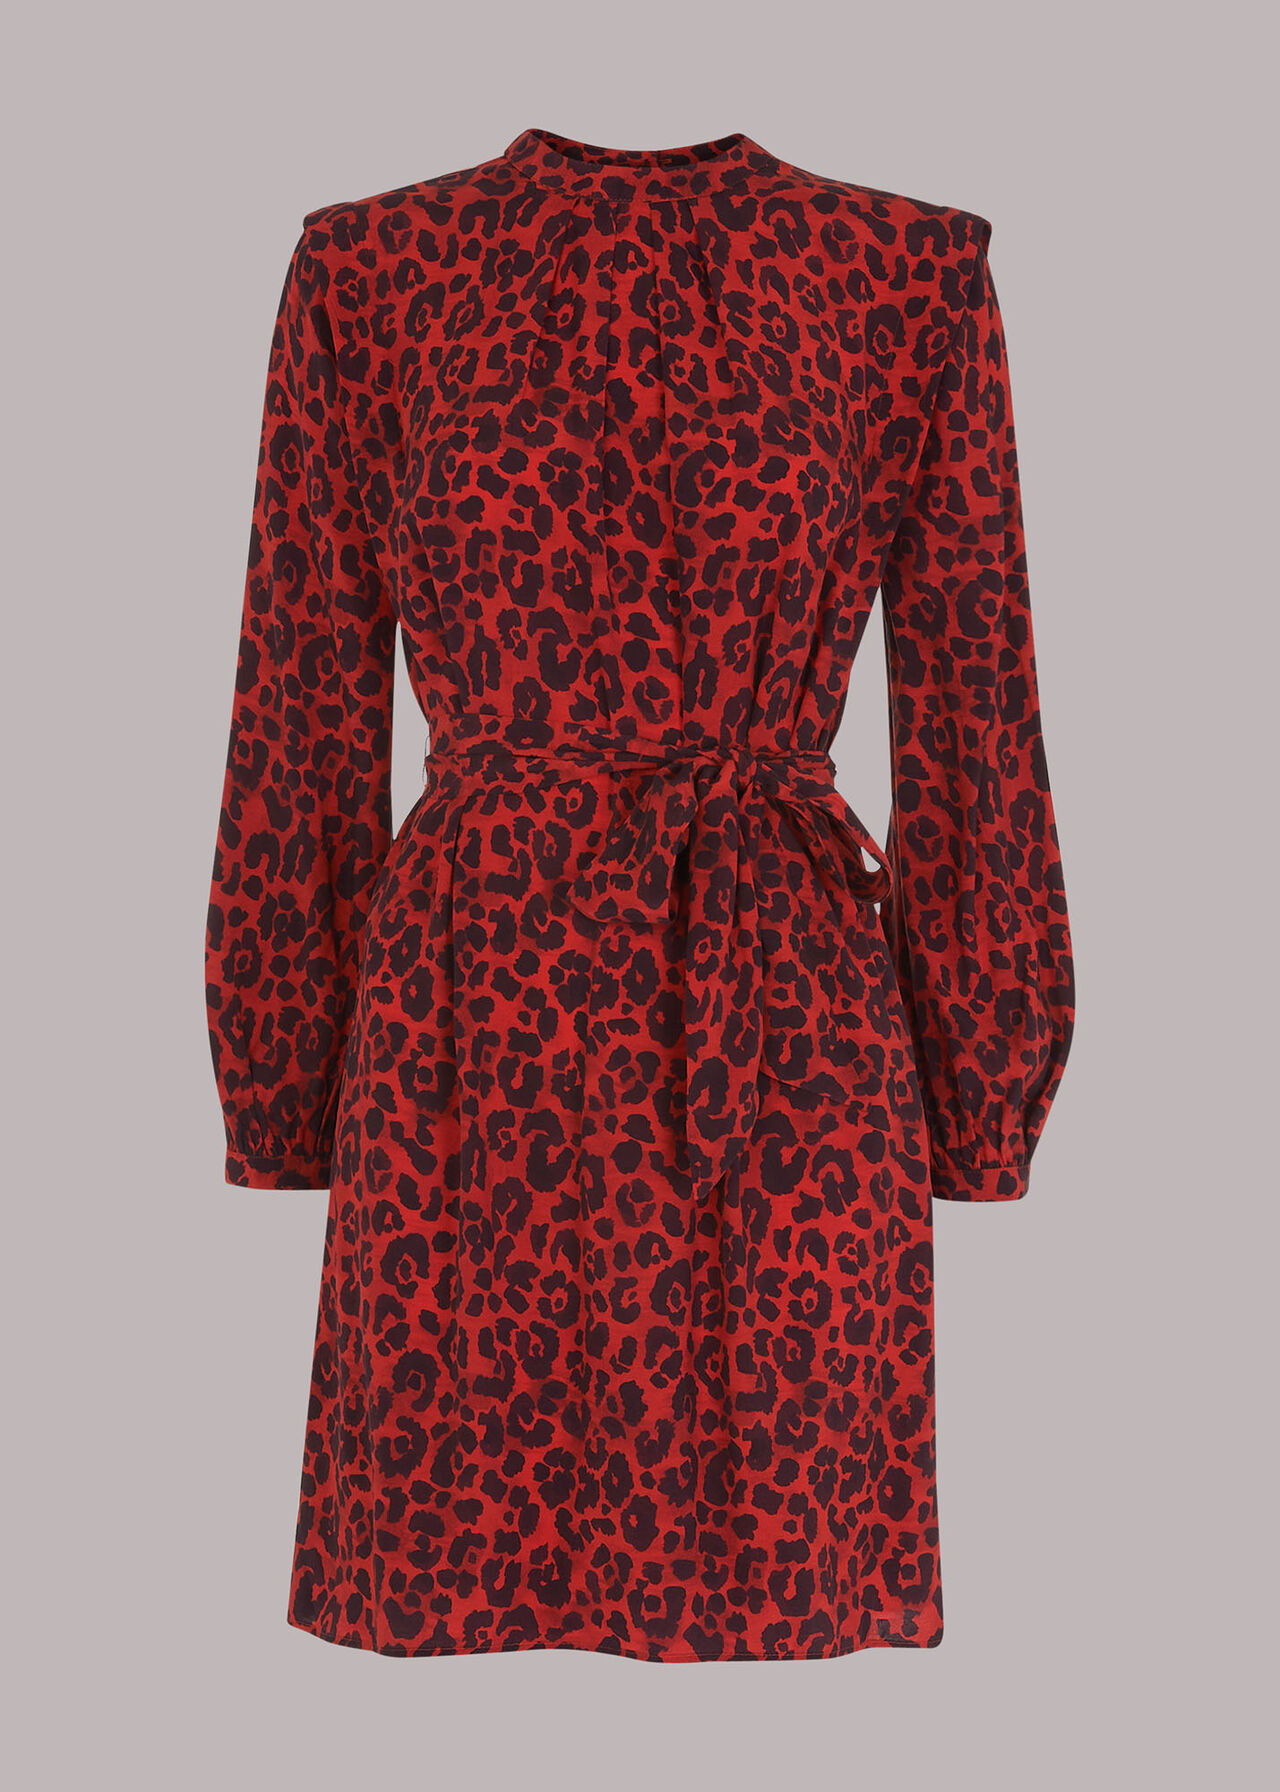 Red/Multi Belted Animal Print Dress | WHISTLES